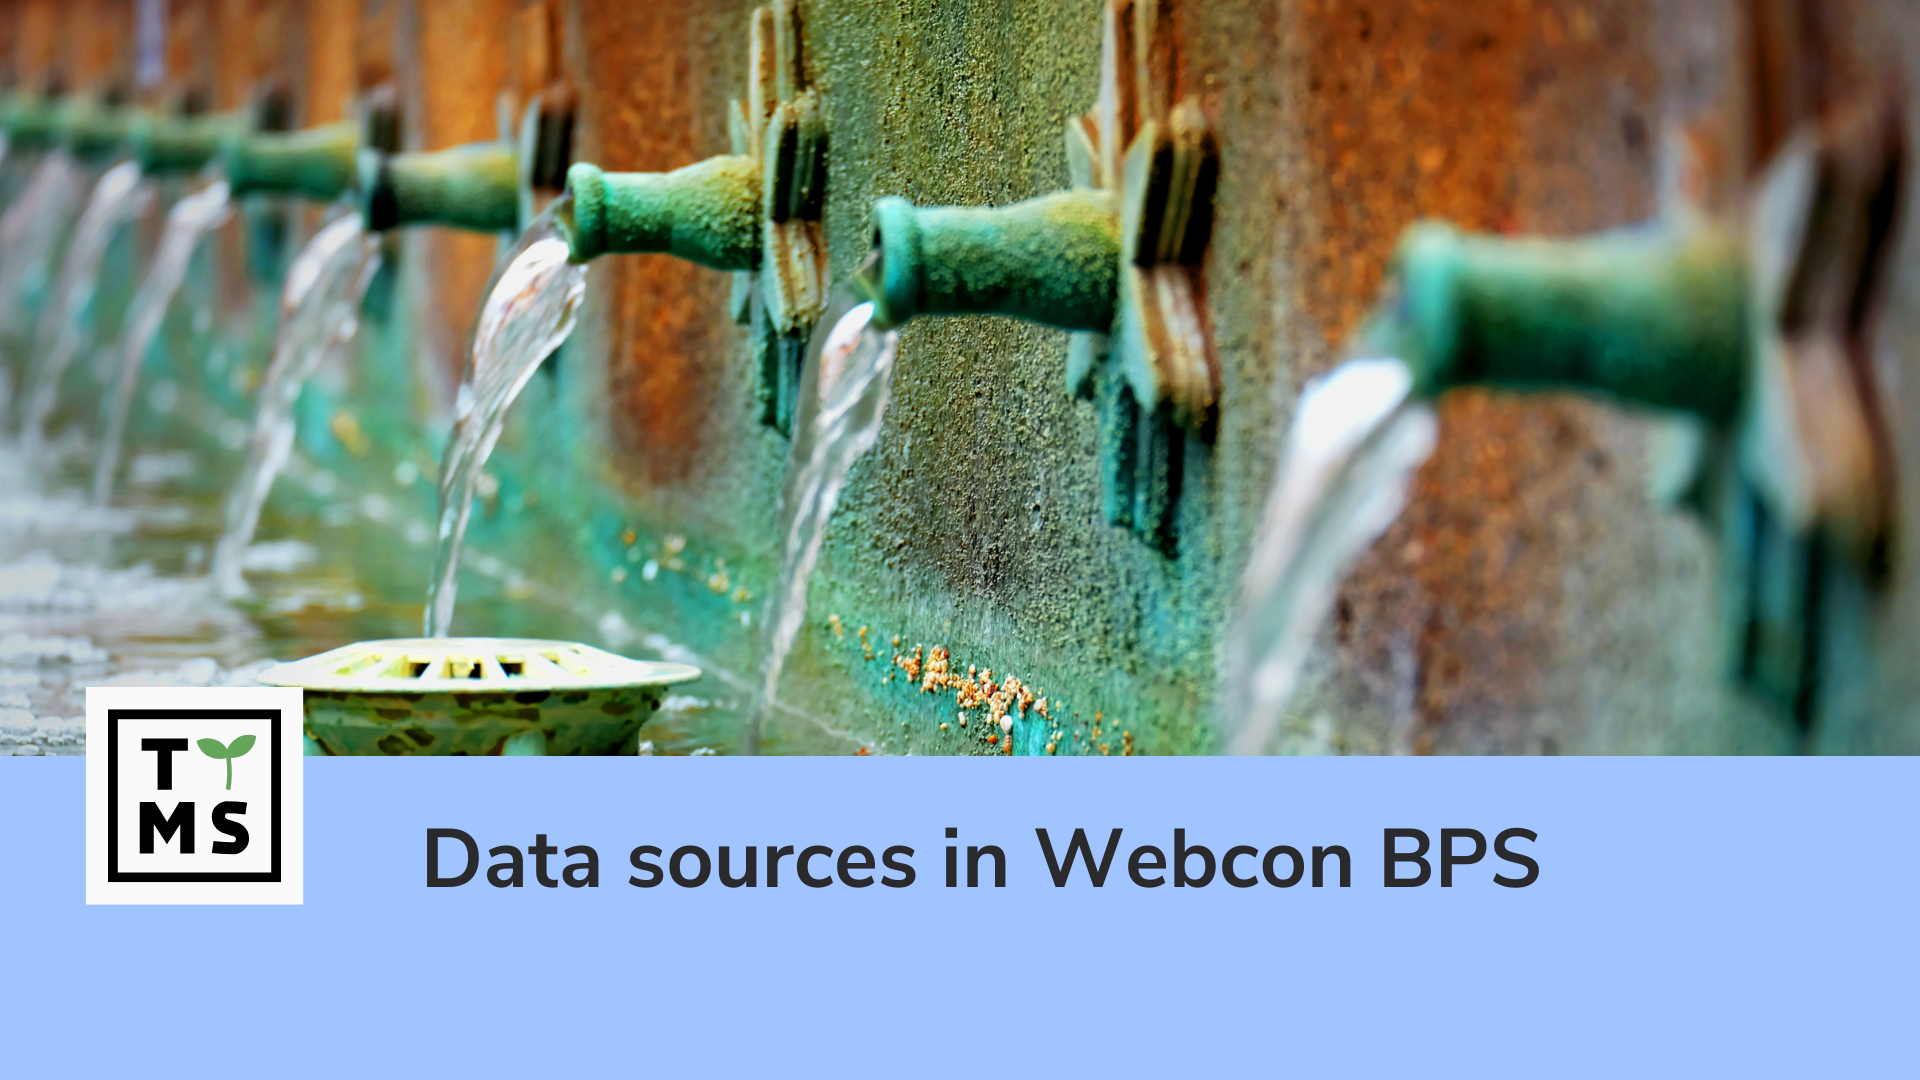 Data sources in Webcon BPS